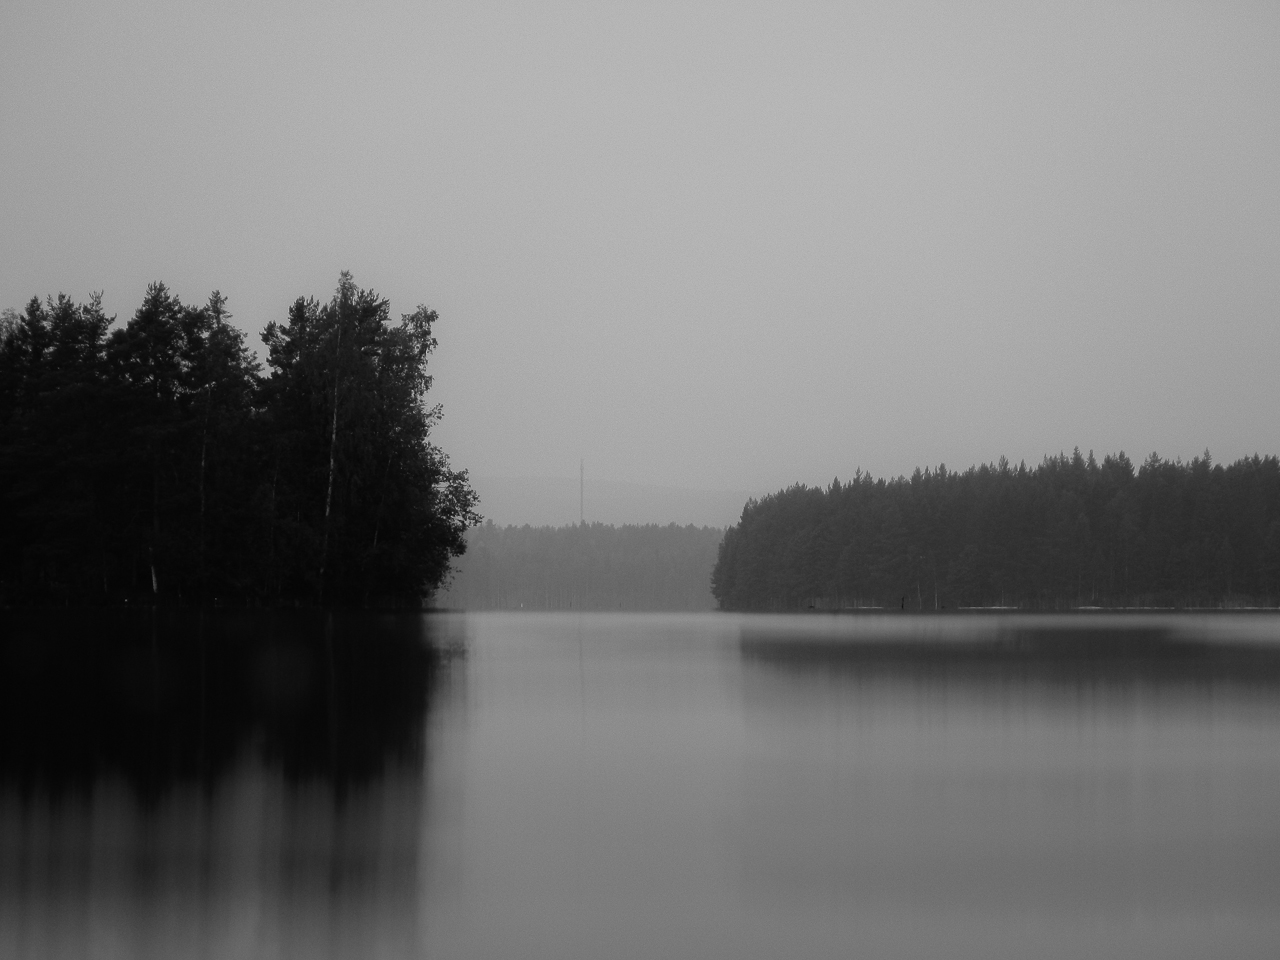 a pond surrounded by evergreen forest on a foggy day